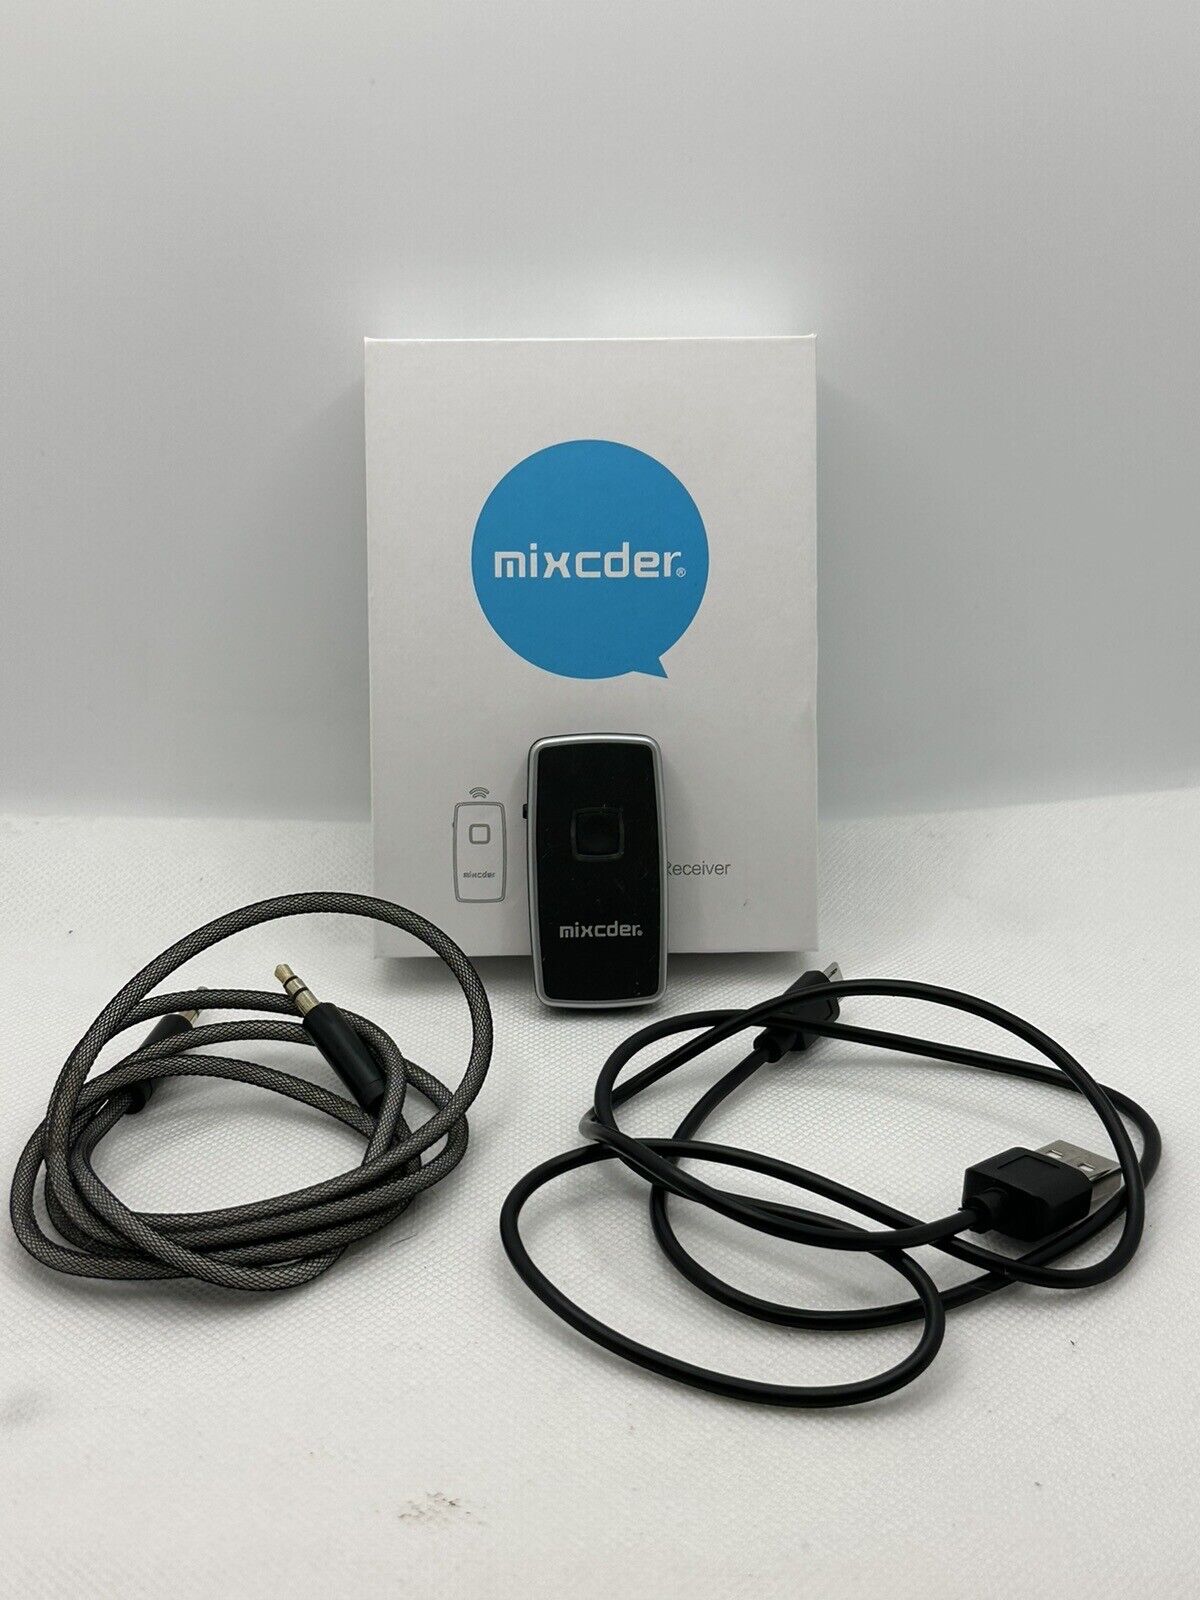 Mixcder Bluetooth Transmitter/Receiver - Black (TR007) 2-IN-1 Wireless - Used